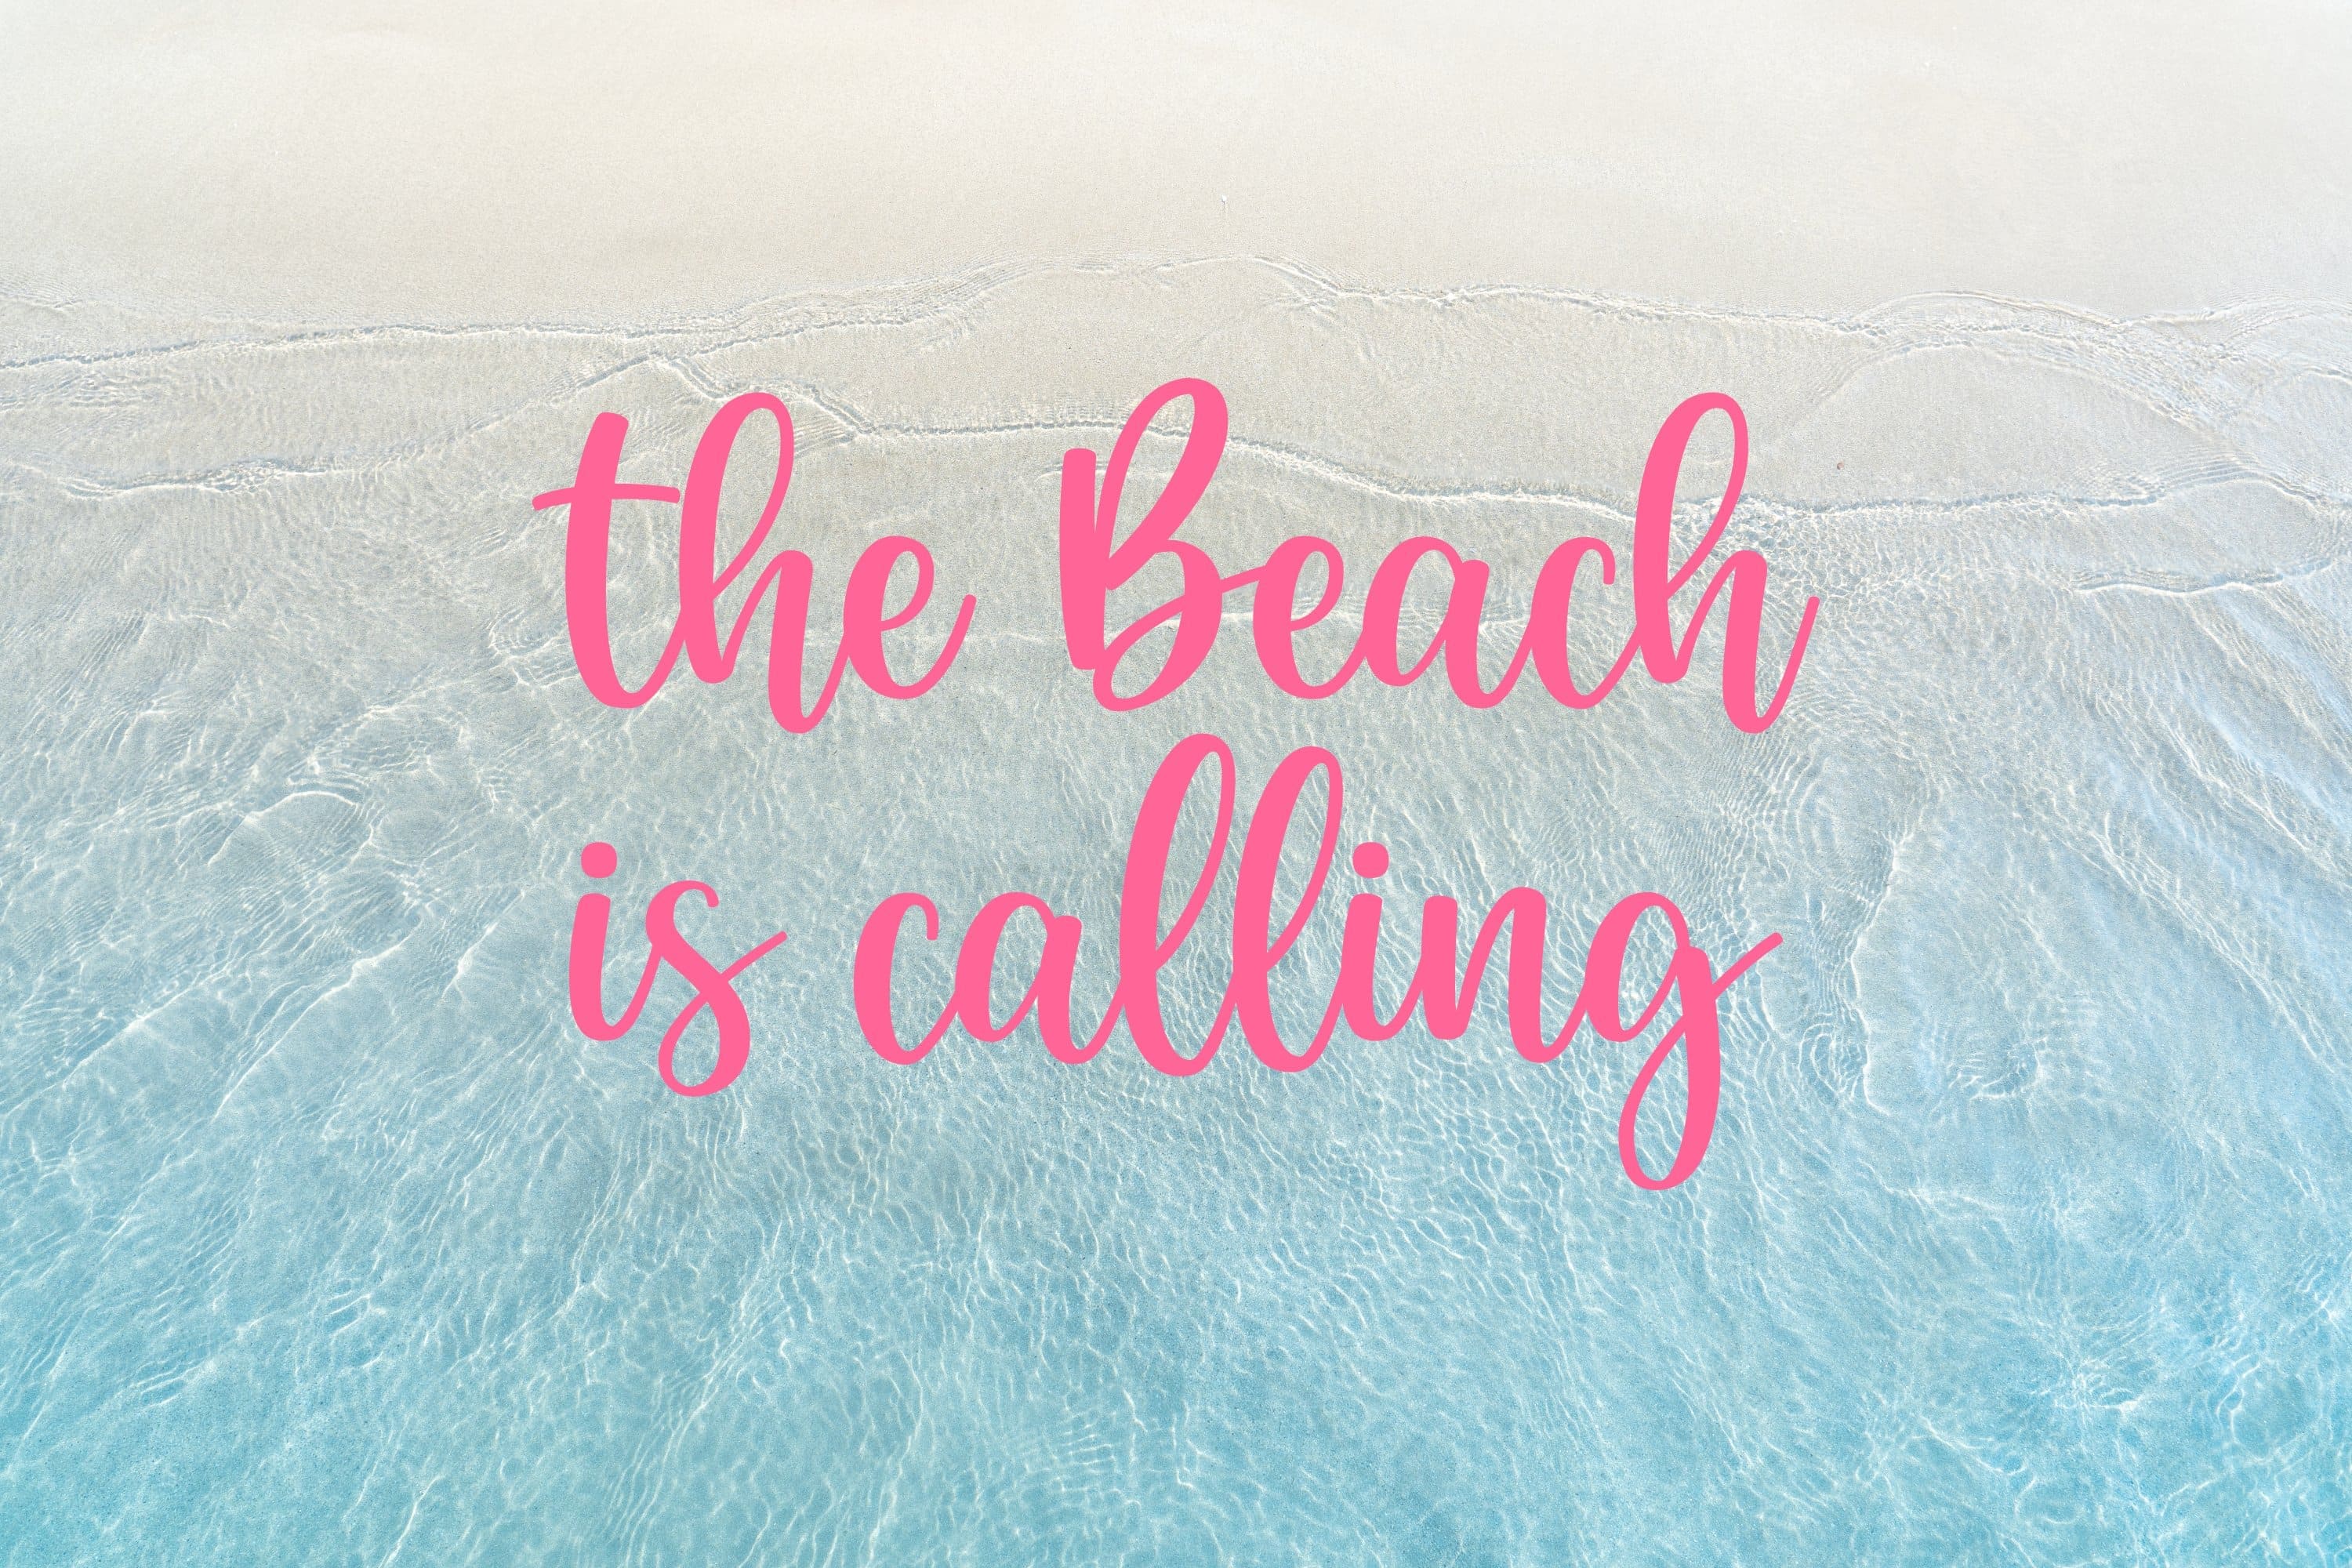 The beach calls you to relax.